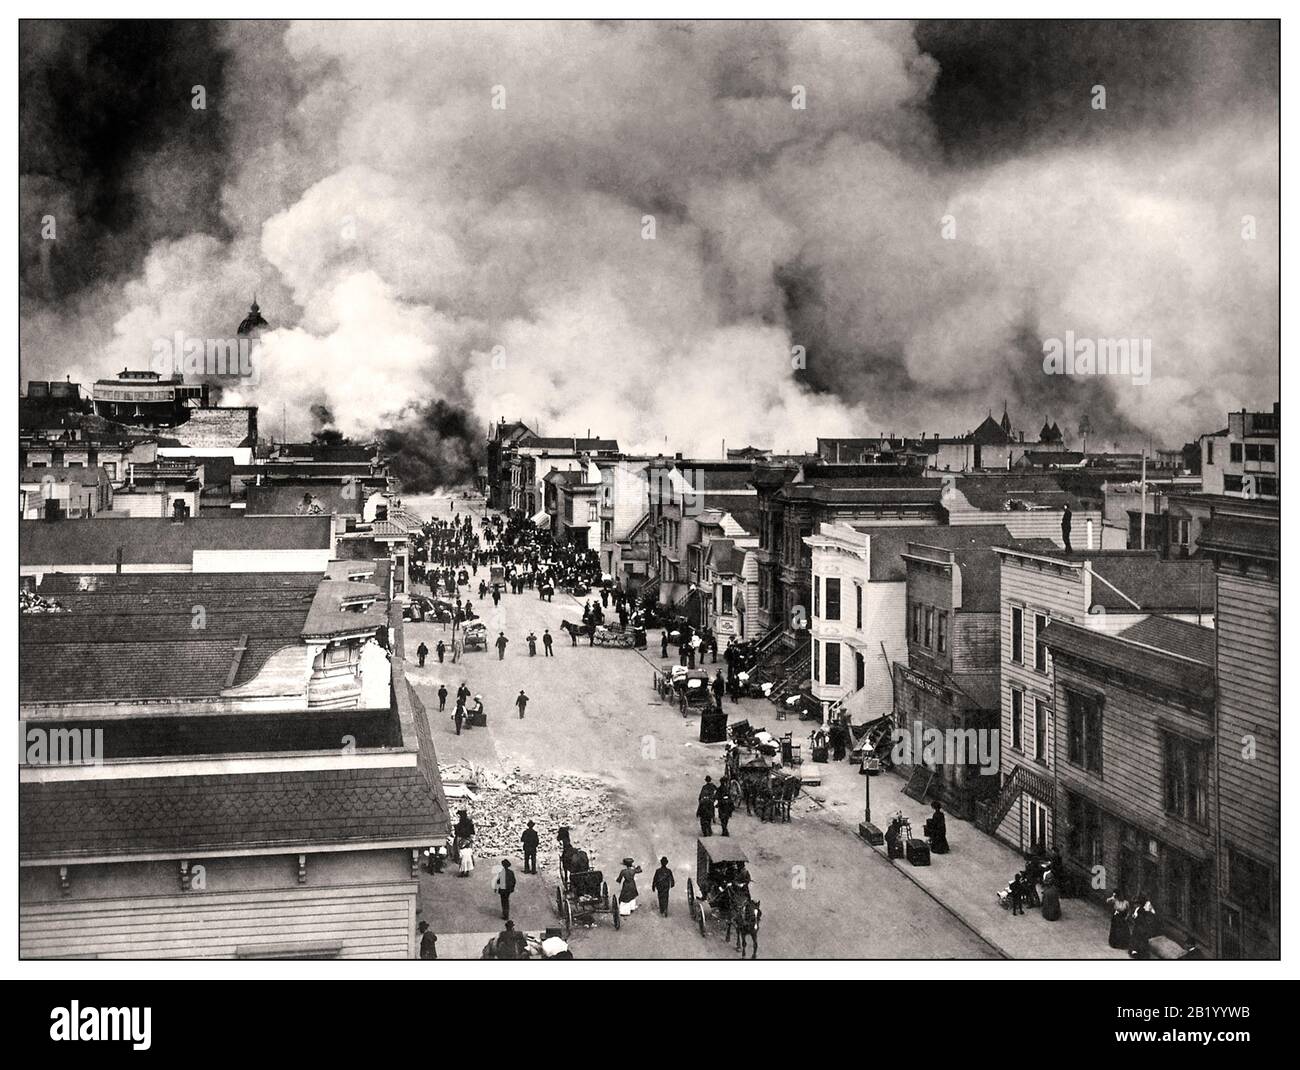 San Francisco Earthquake of 1906 B&W image of San Francisco Mission District burning in the aftermath of the San Francisco Earthquake of 1906. California US A major earthquake that struck San Francisco and the coast of Northern California at 5:12 a.m. on Wednesday, April 18, 1906 Stock Photo